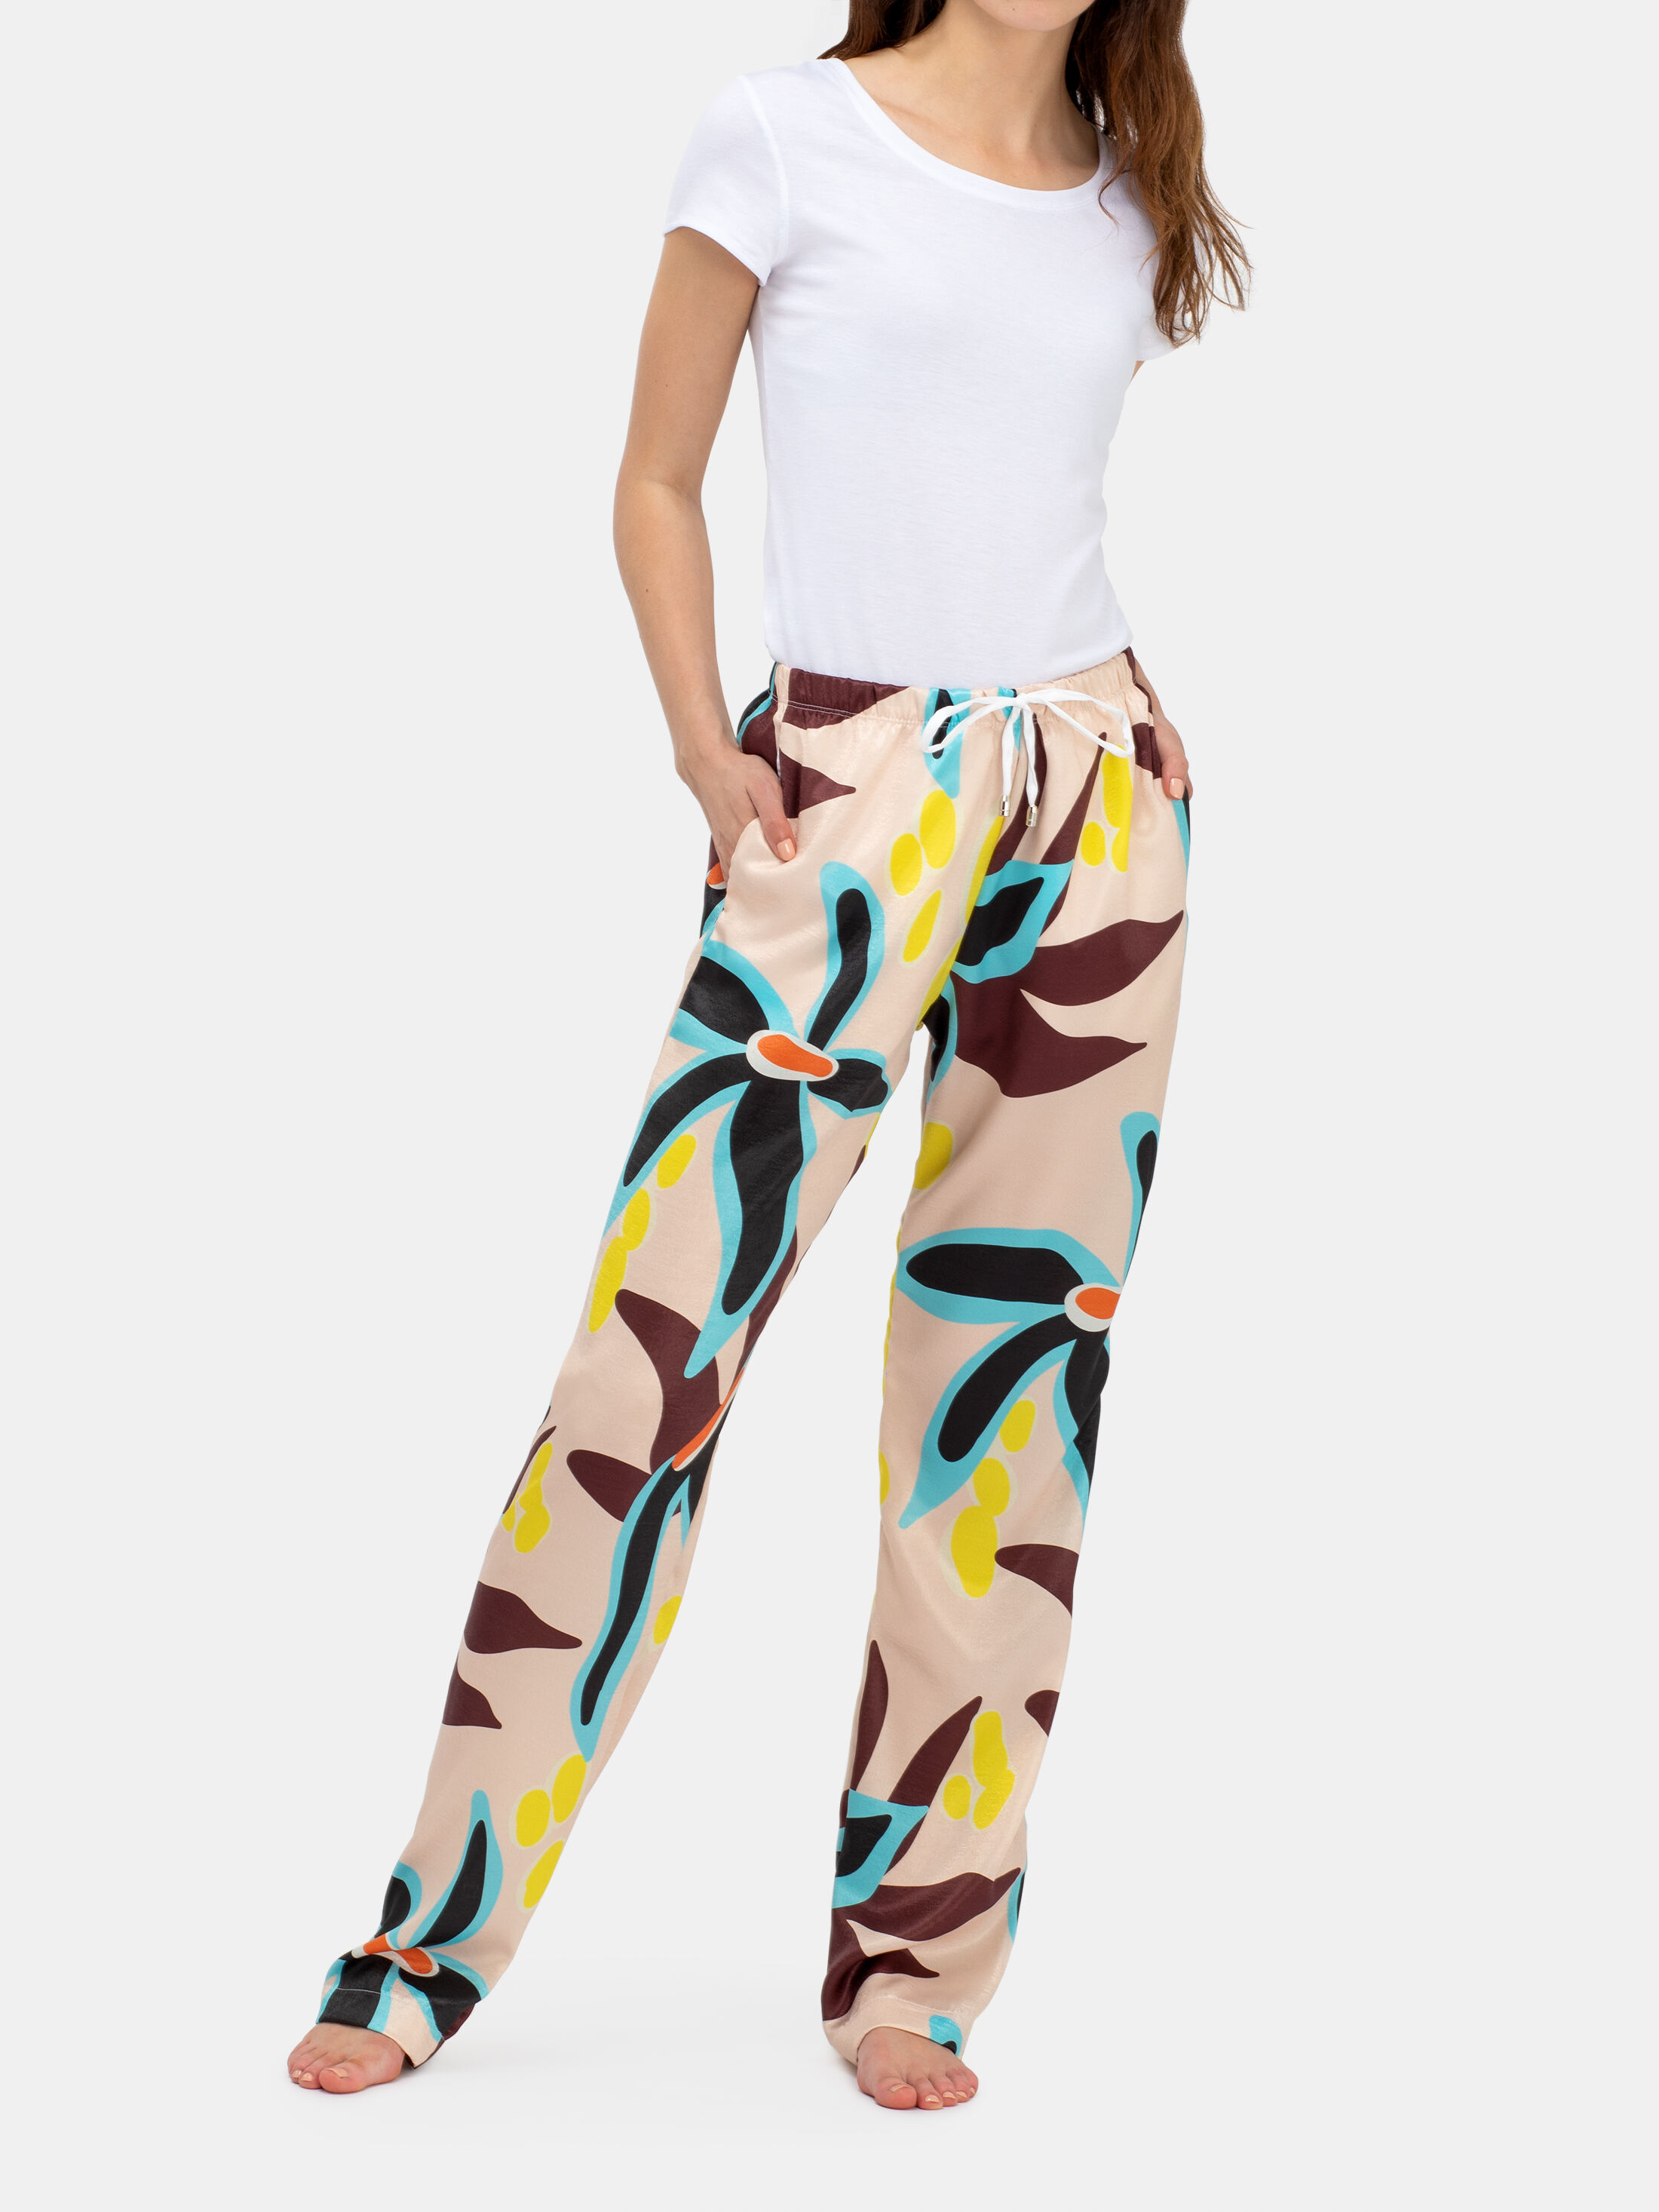 Satin printed trousers - Woman | MANGO OUTLET India